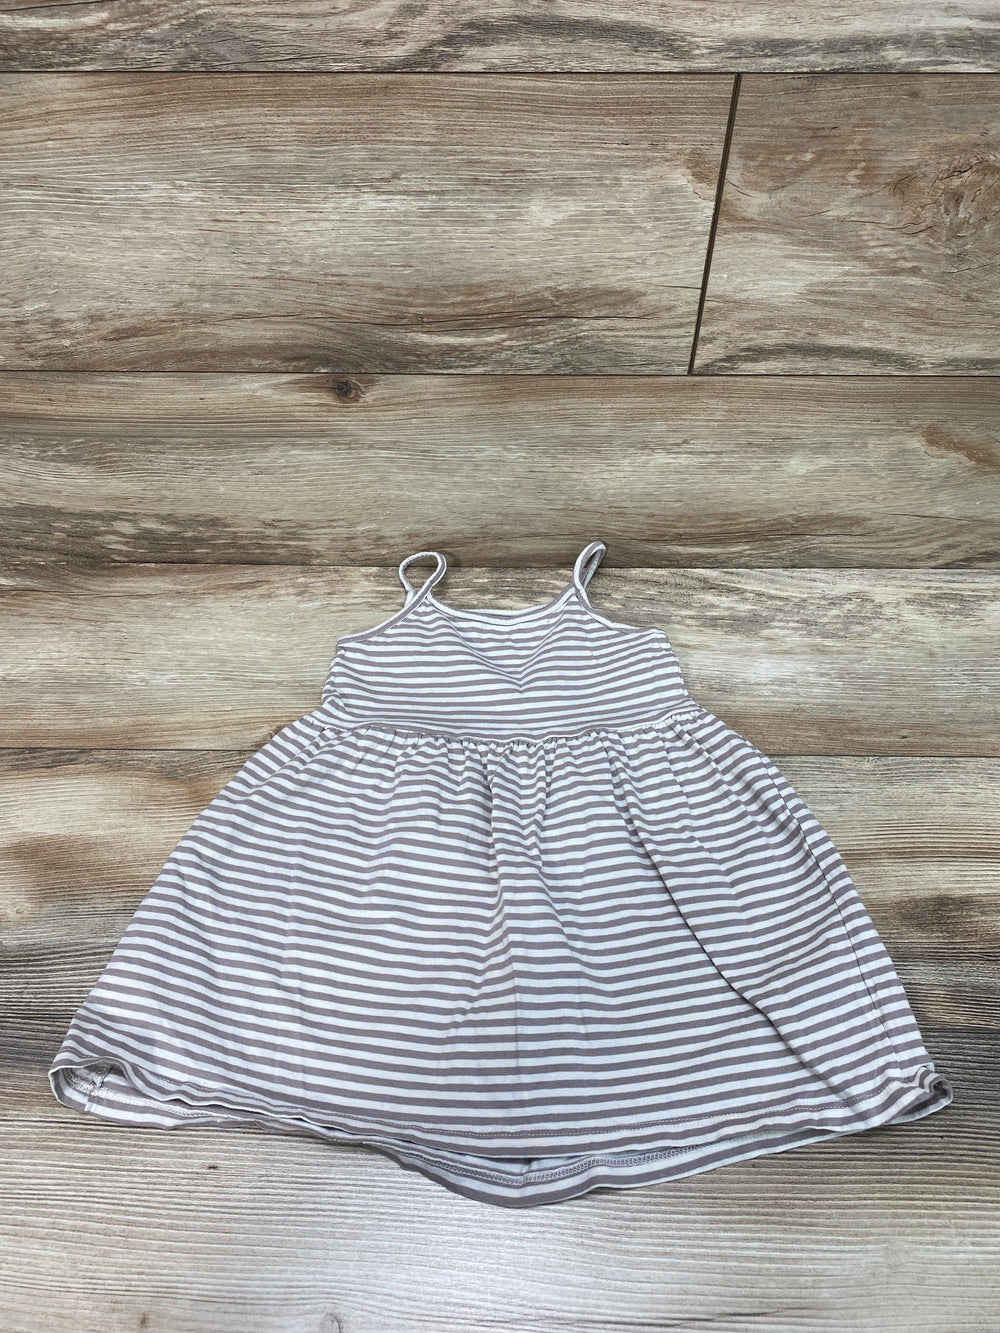 H&M Grey Striped Dress sz 3-4T - Me 'n Mommy To Be